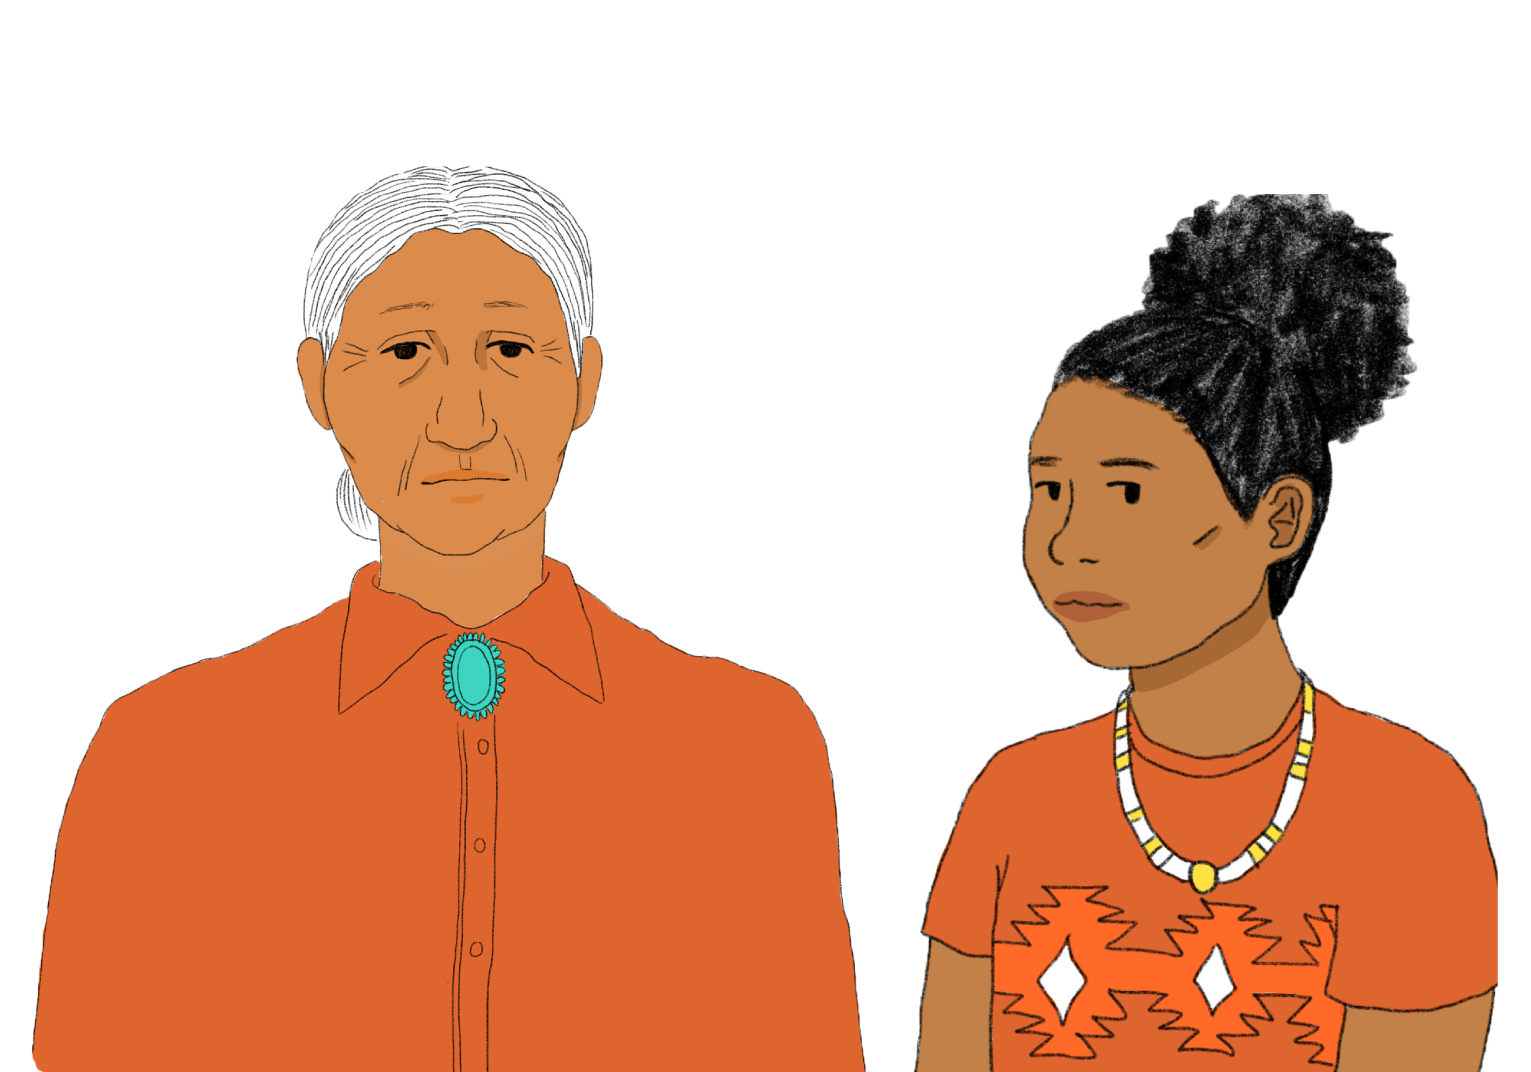 An elderly Native woman on the left in an orange shirt and an African Native American girl on the right with an orange shirt and white necklace.